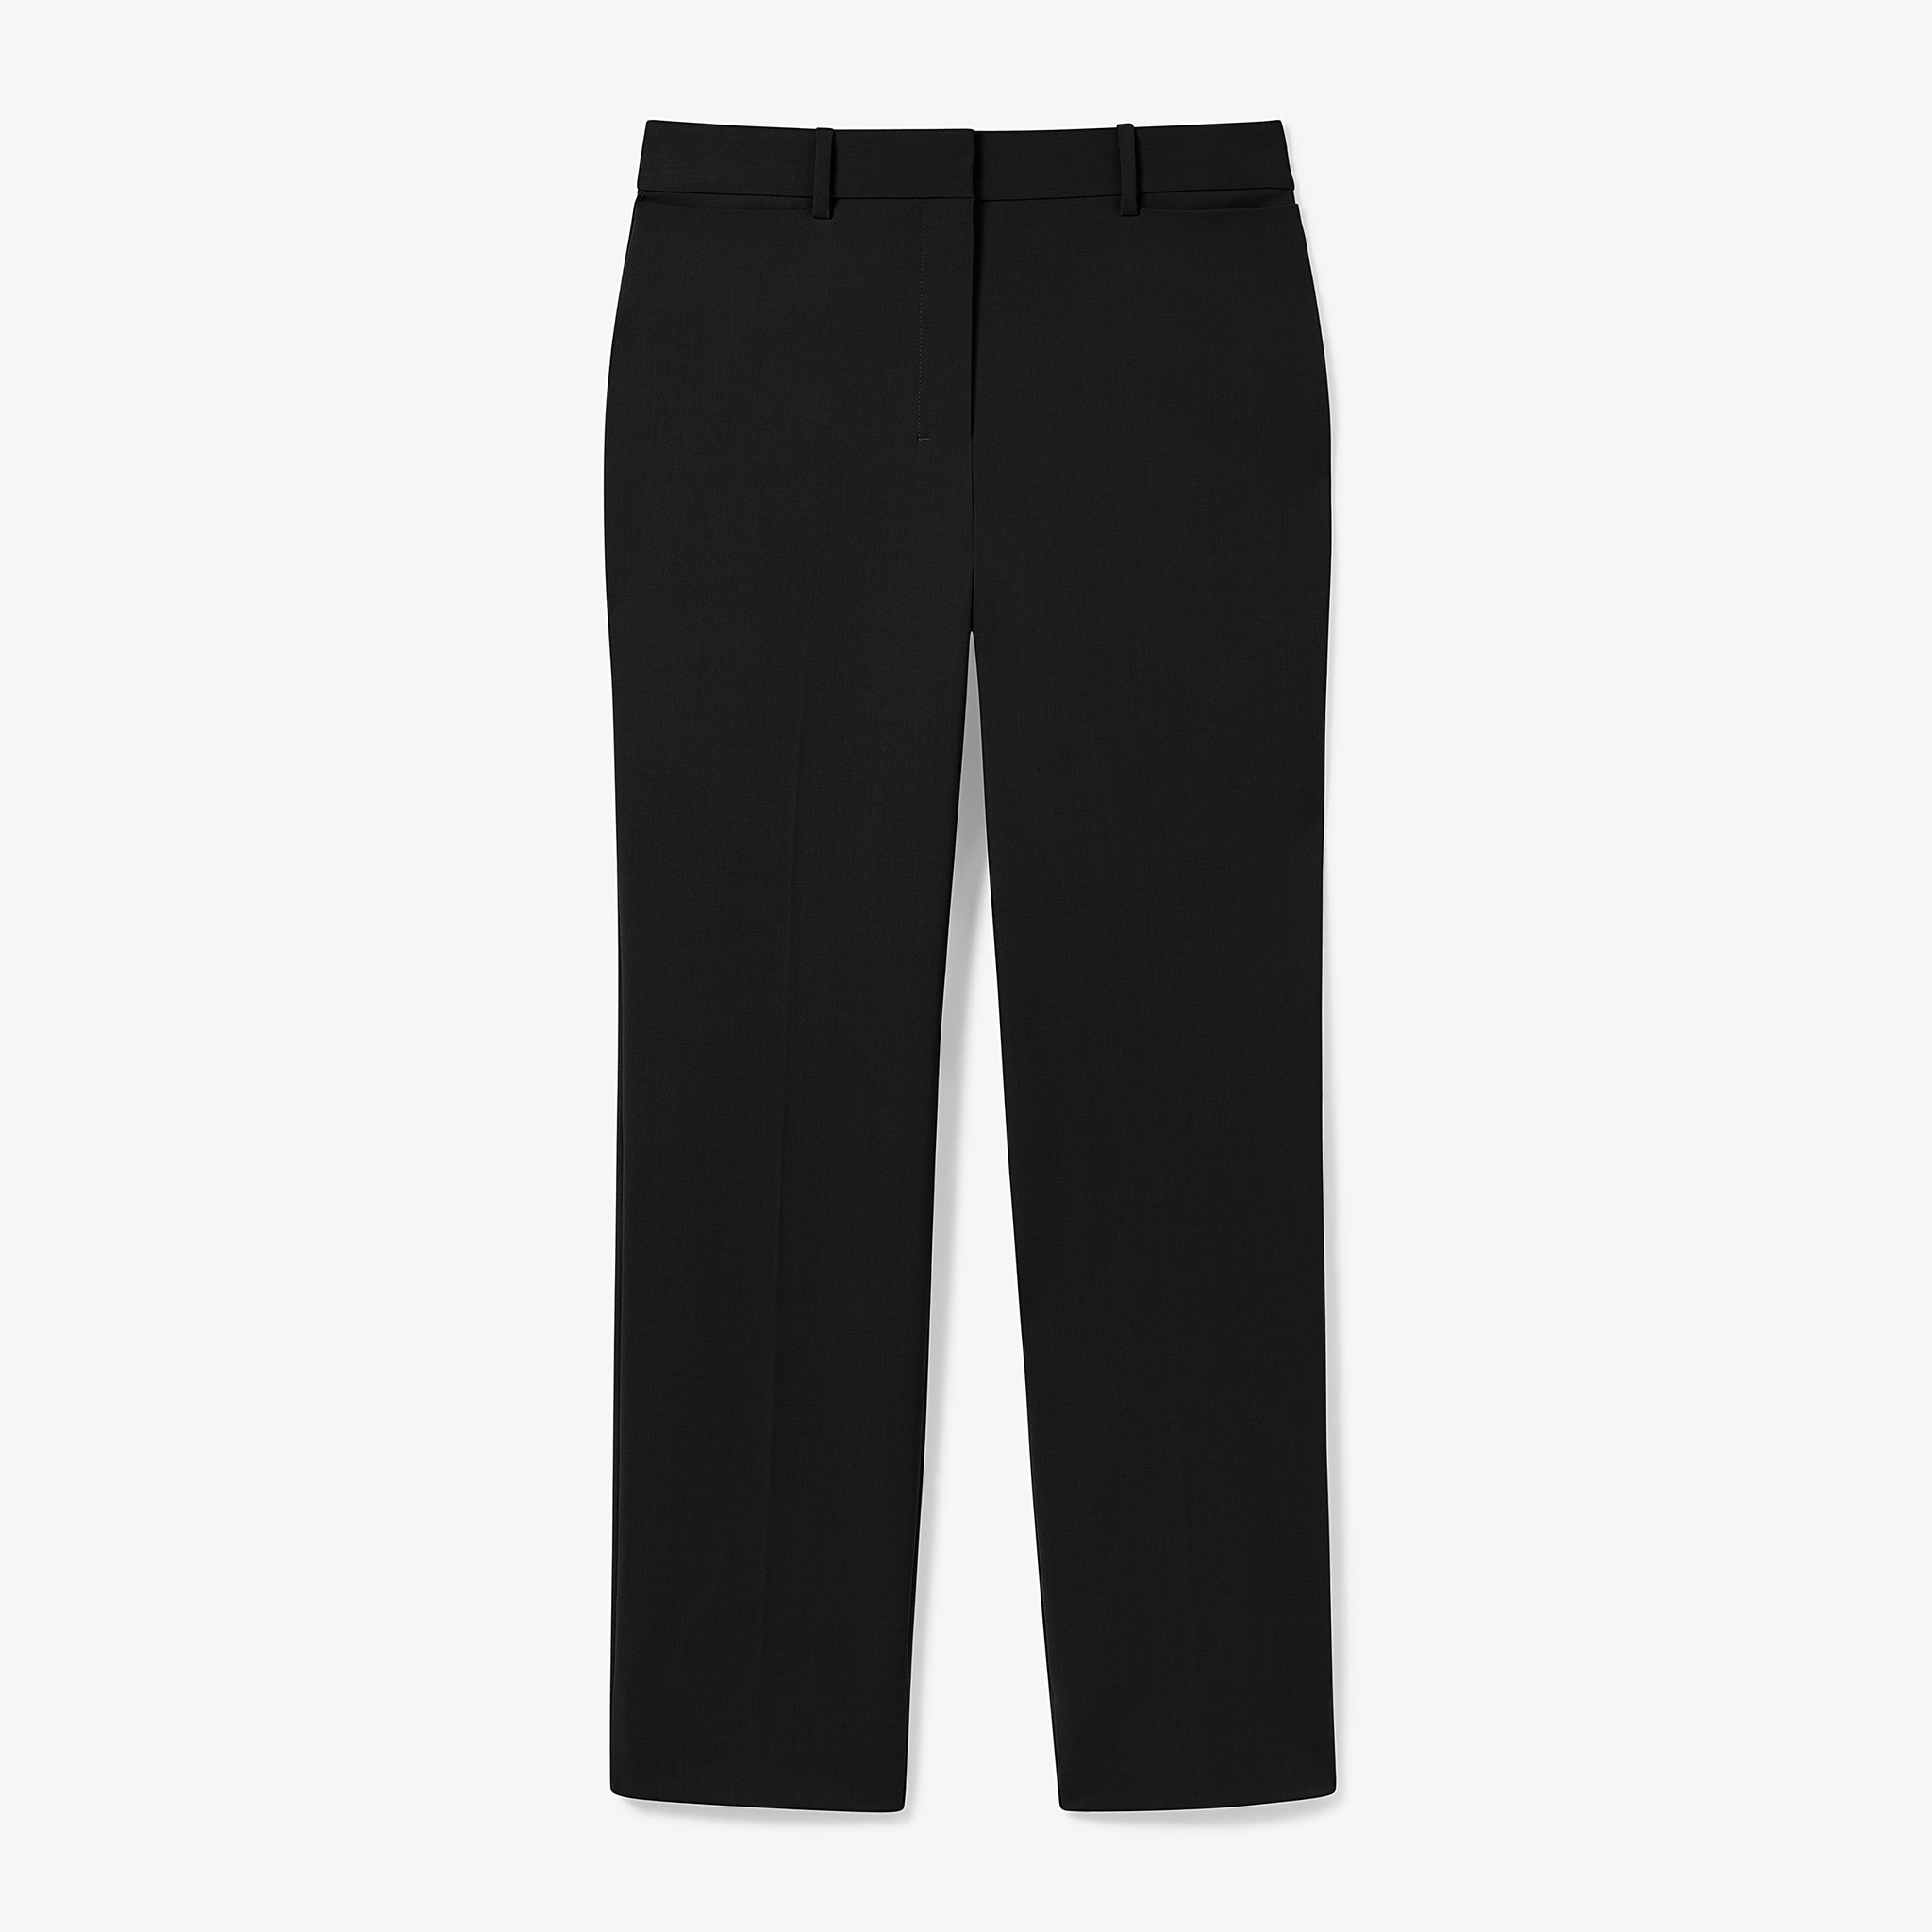 Packshot image of the smith pant in black